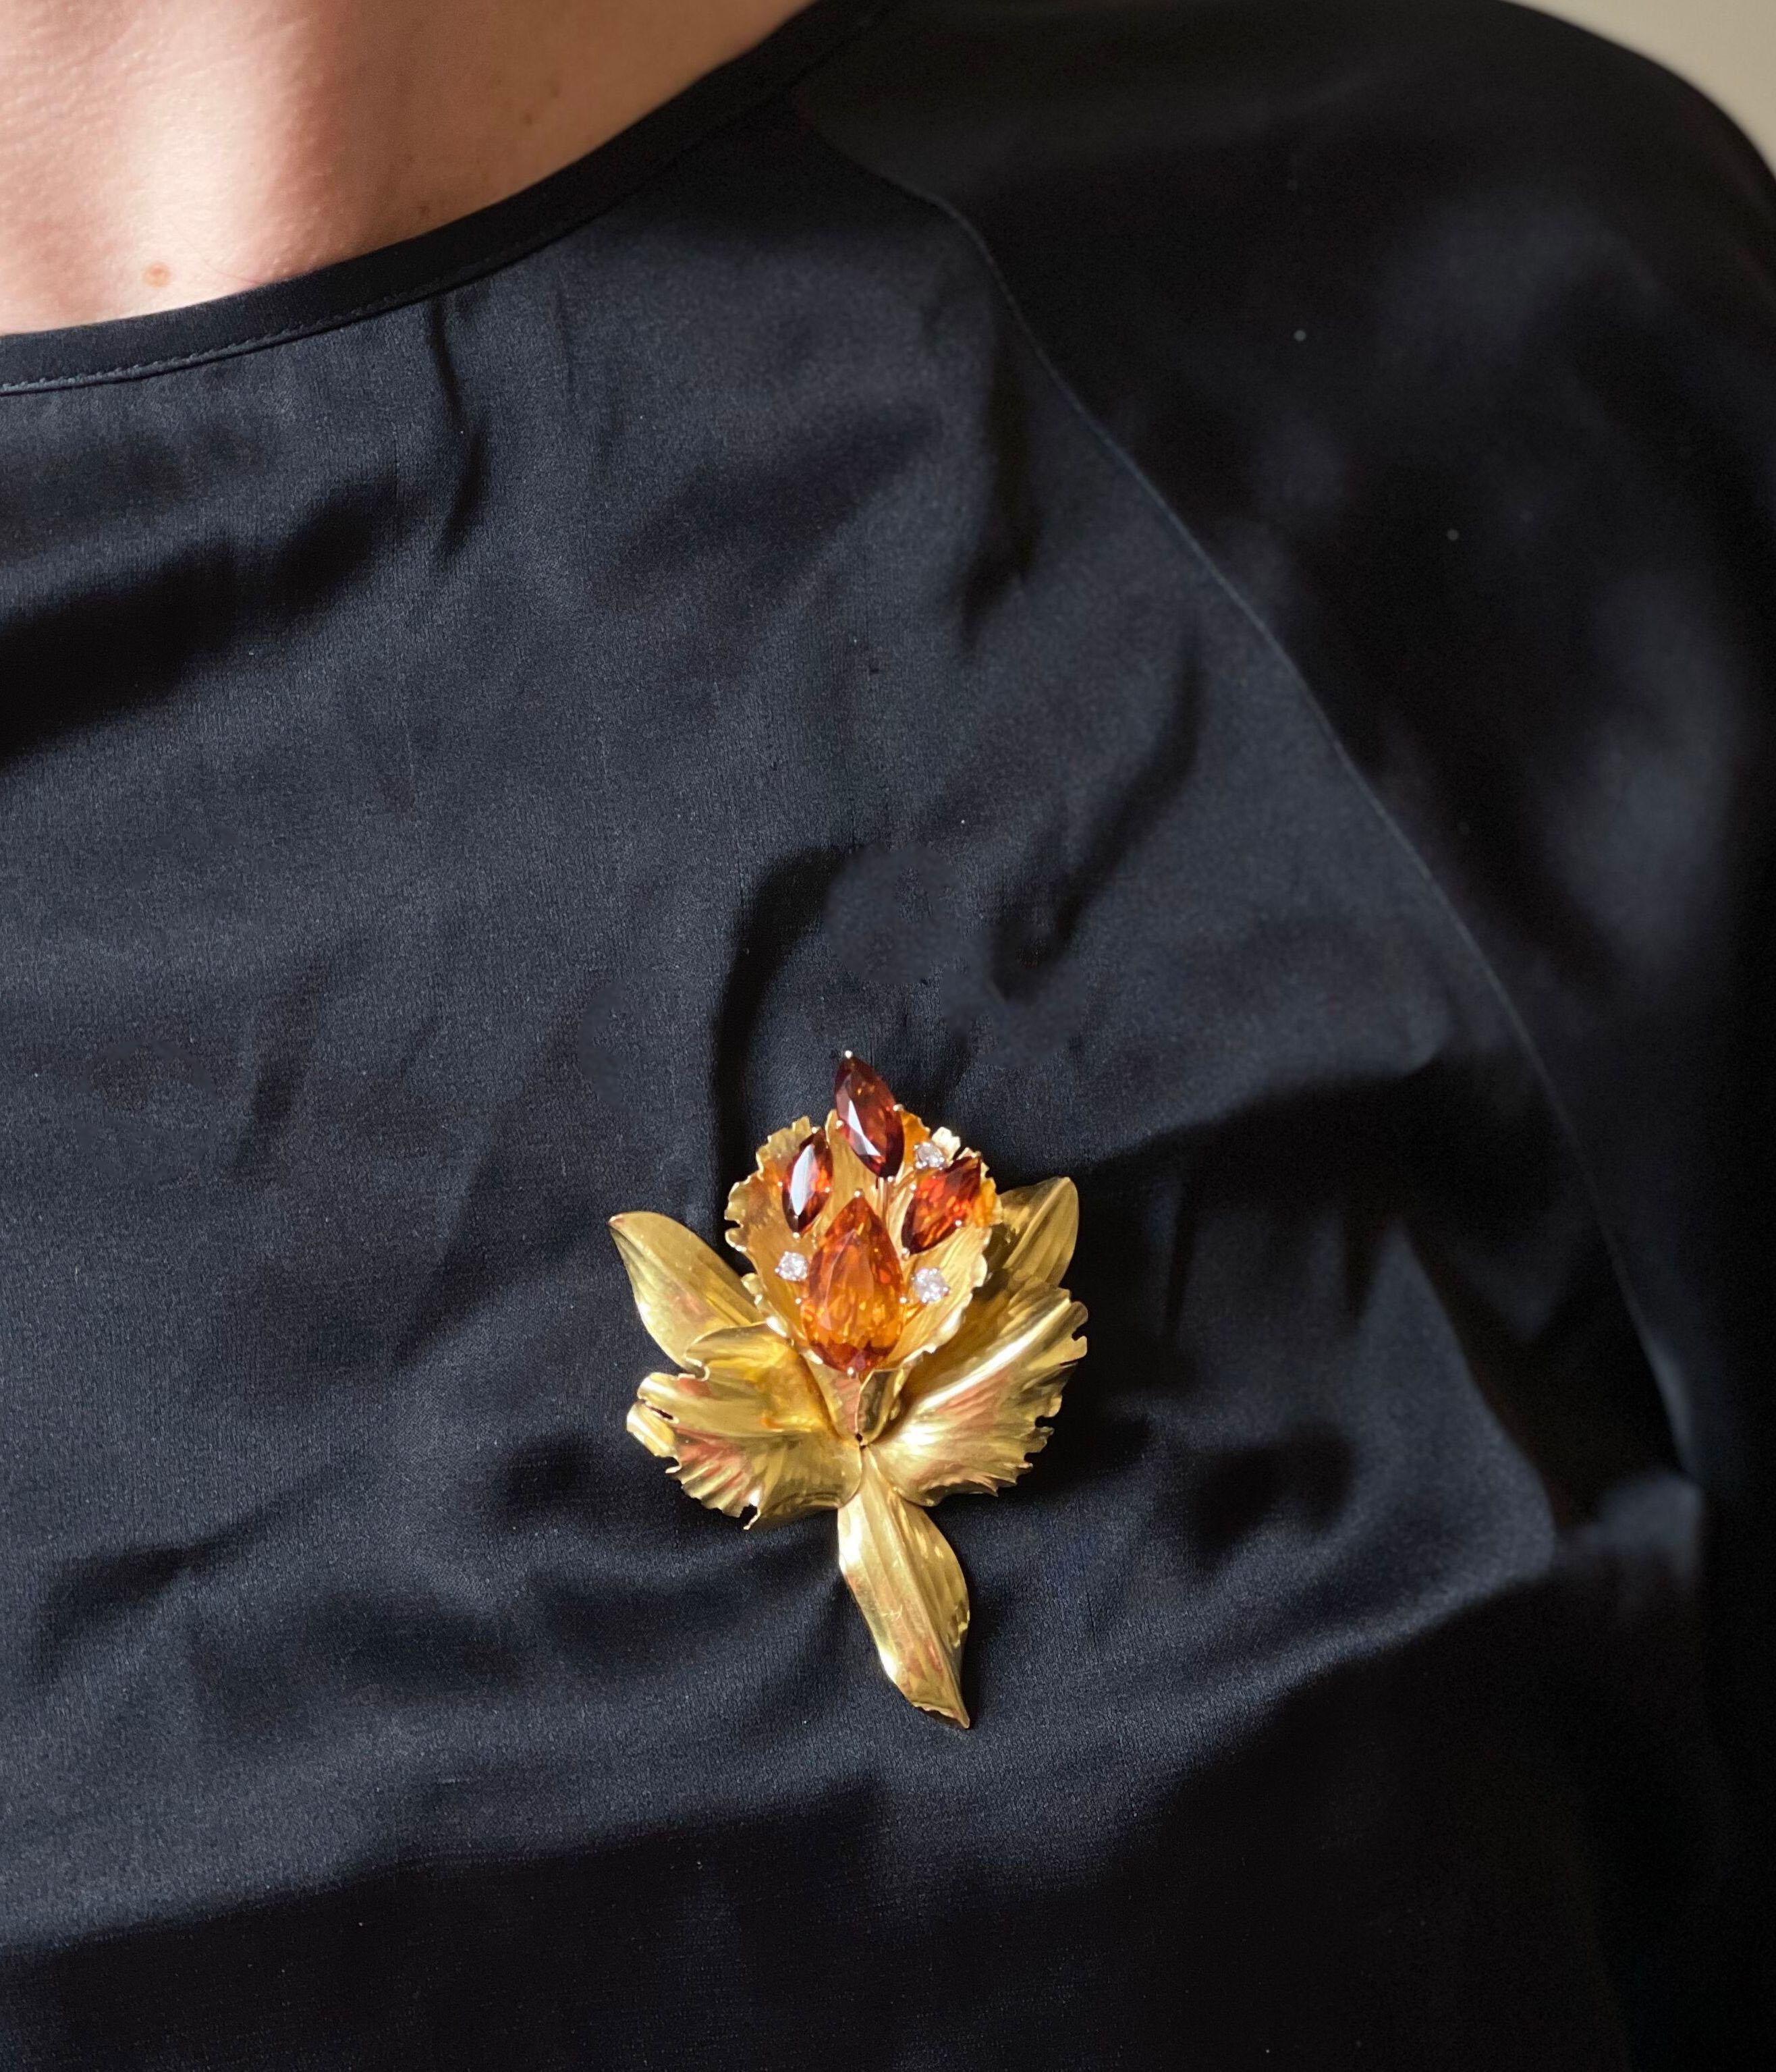 Large 18k gold orchid flower brooch by Cartier, with citrine and madeira citrine, surrounded with approx. 0.34ctw G/VS diamonds. Brooch measures 2 7/8